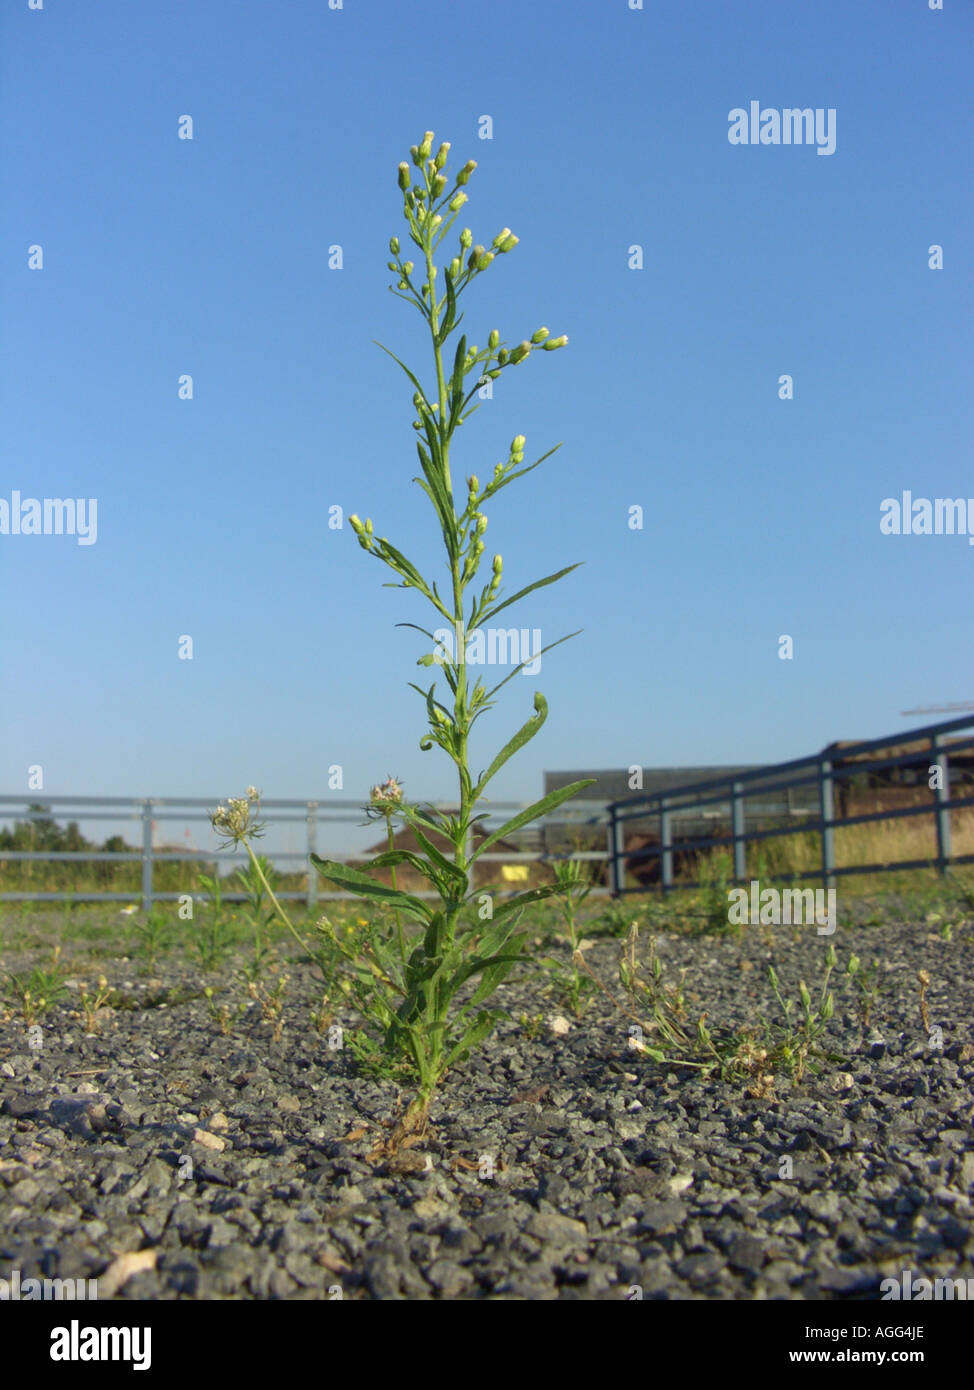 horseweed, Canadian fleabane (Conyza canadensis, Erigeron canadensis), plant on industrial ground, Germany, Bochum Stock Photo